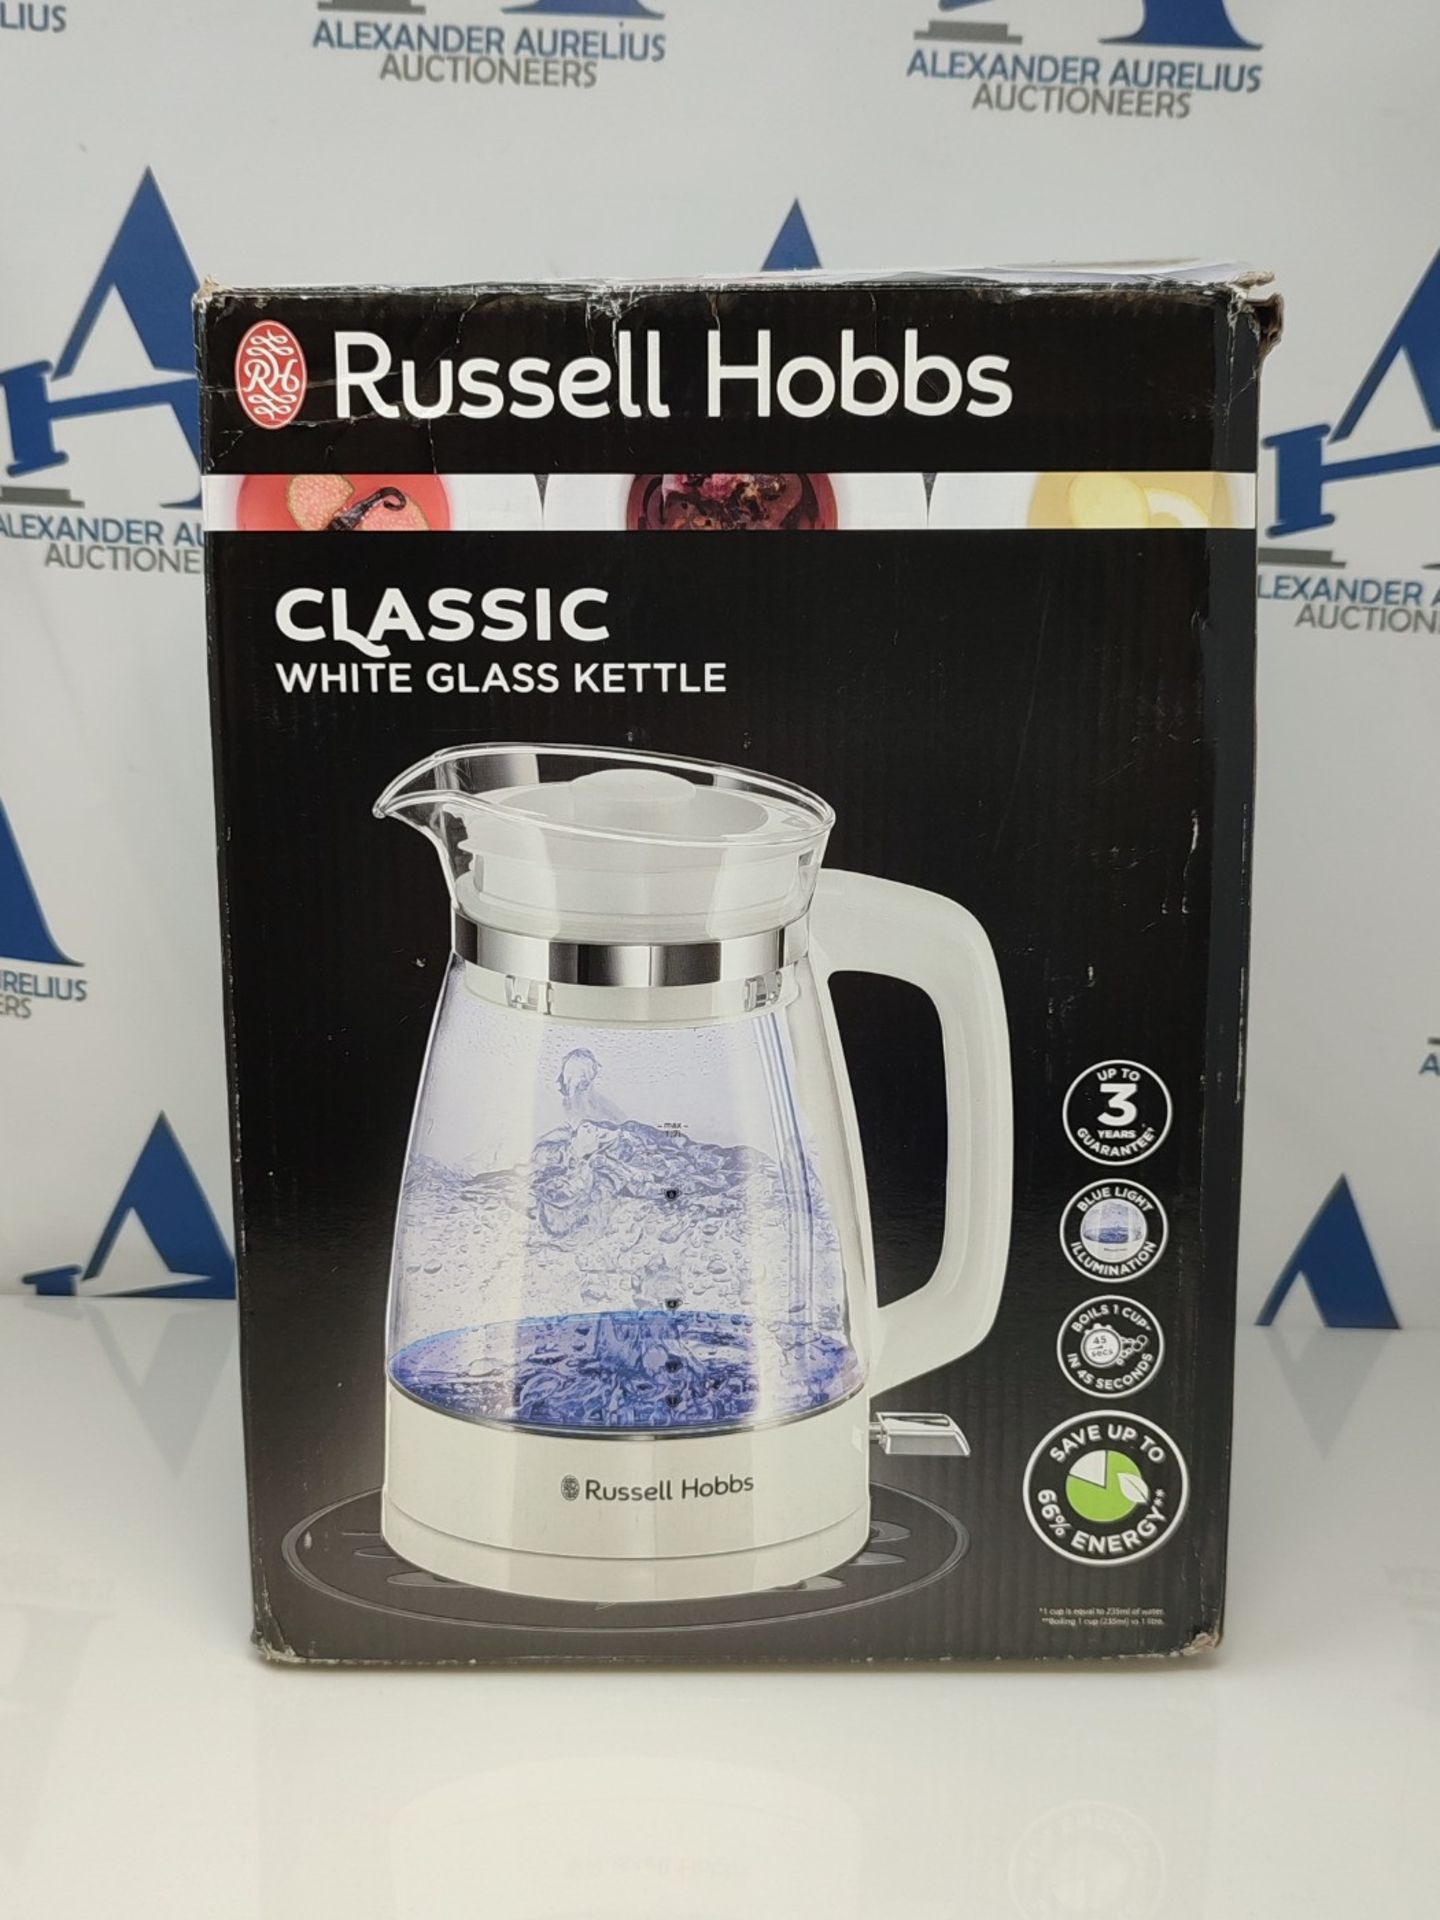 Russell Hobbs 26081 Classic Glass Kettle White - Image 2 of 3